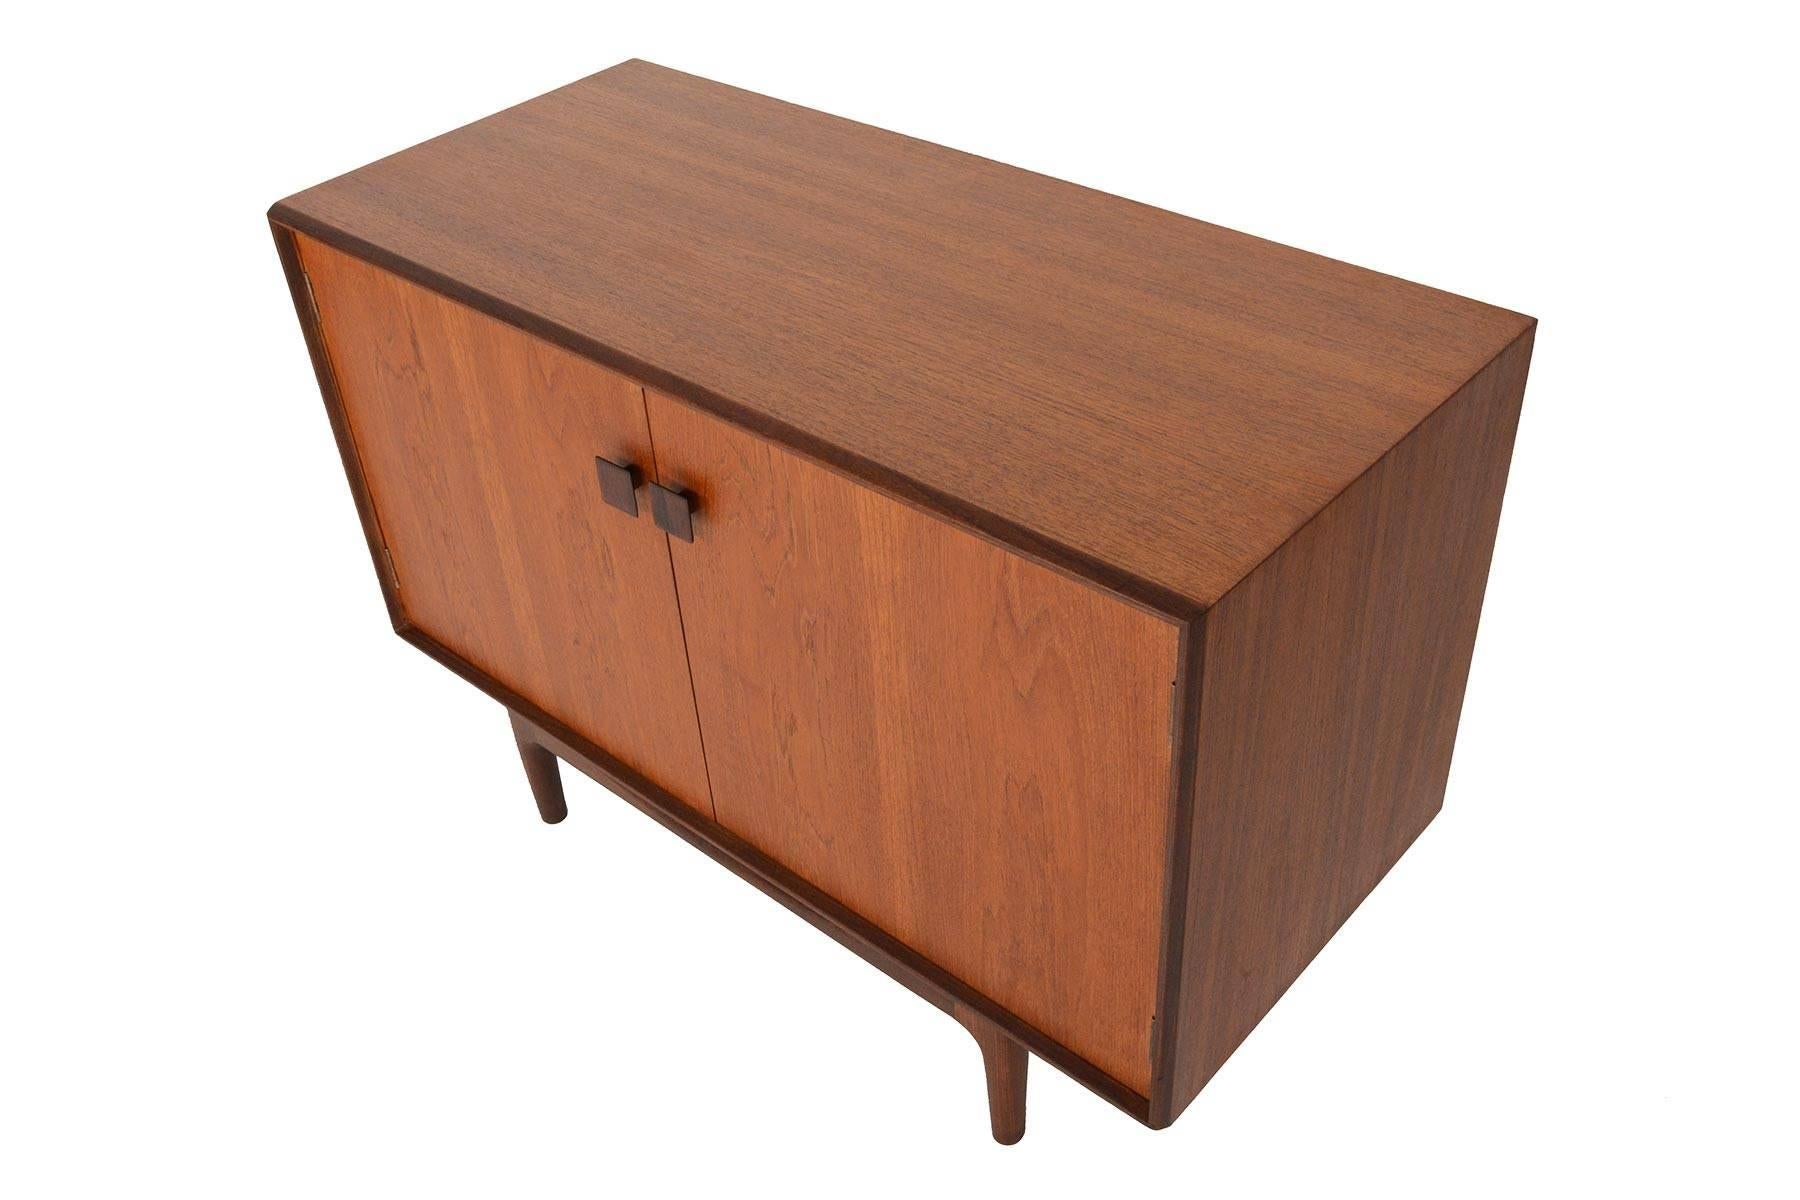 20th Century Small Refinished Teak Credenza by Ib Kofod-Larsen for G-Plan #4